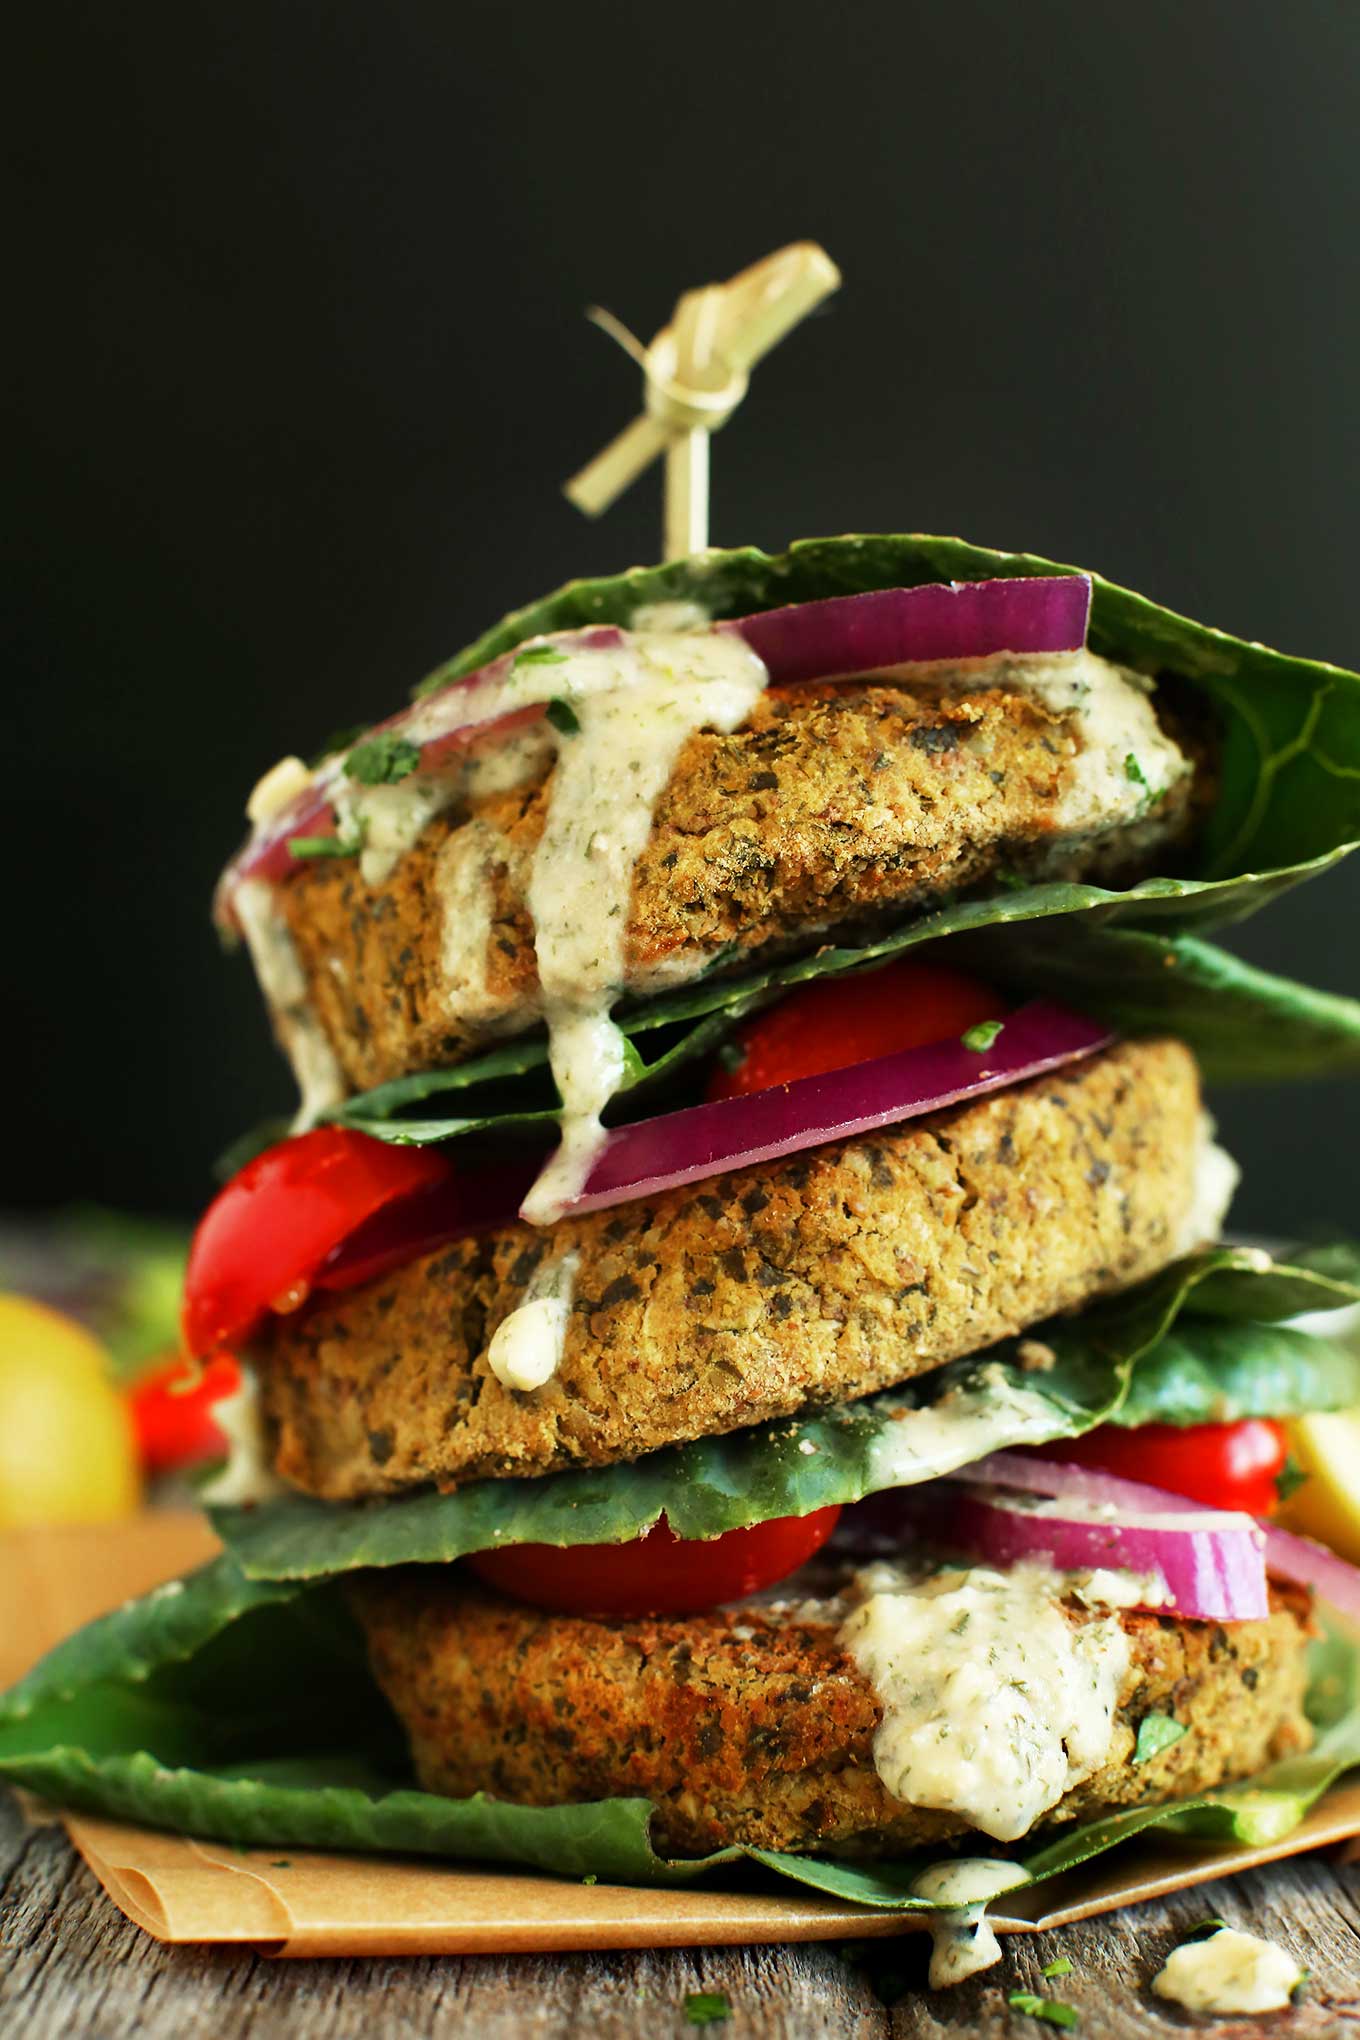 Stacked falafel burgers in collard green wraps with onion, tomato, and sauce